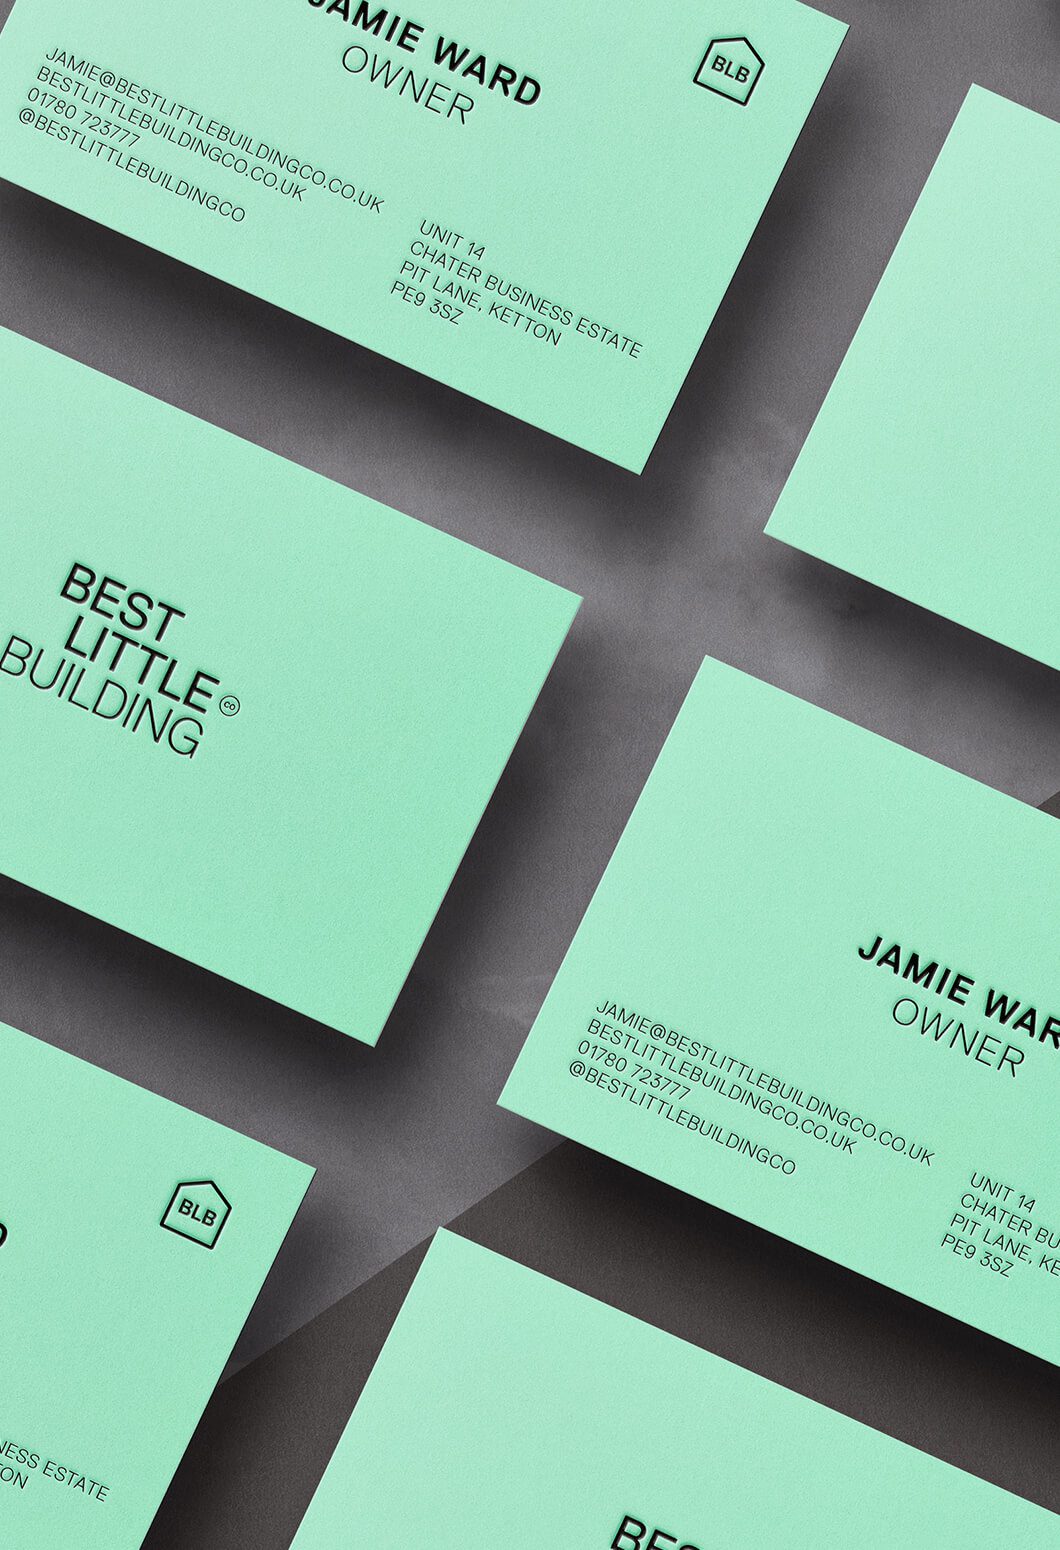 Business cards for brand